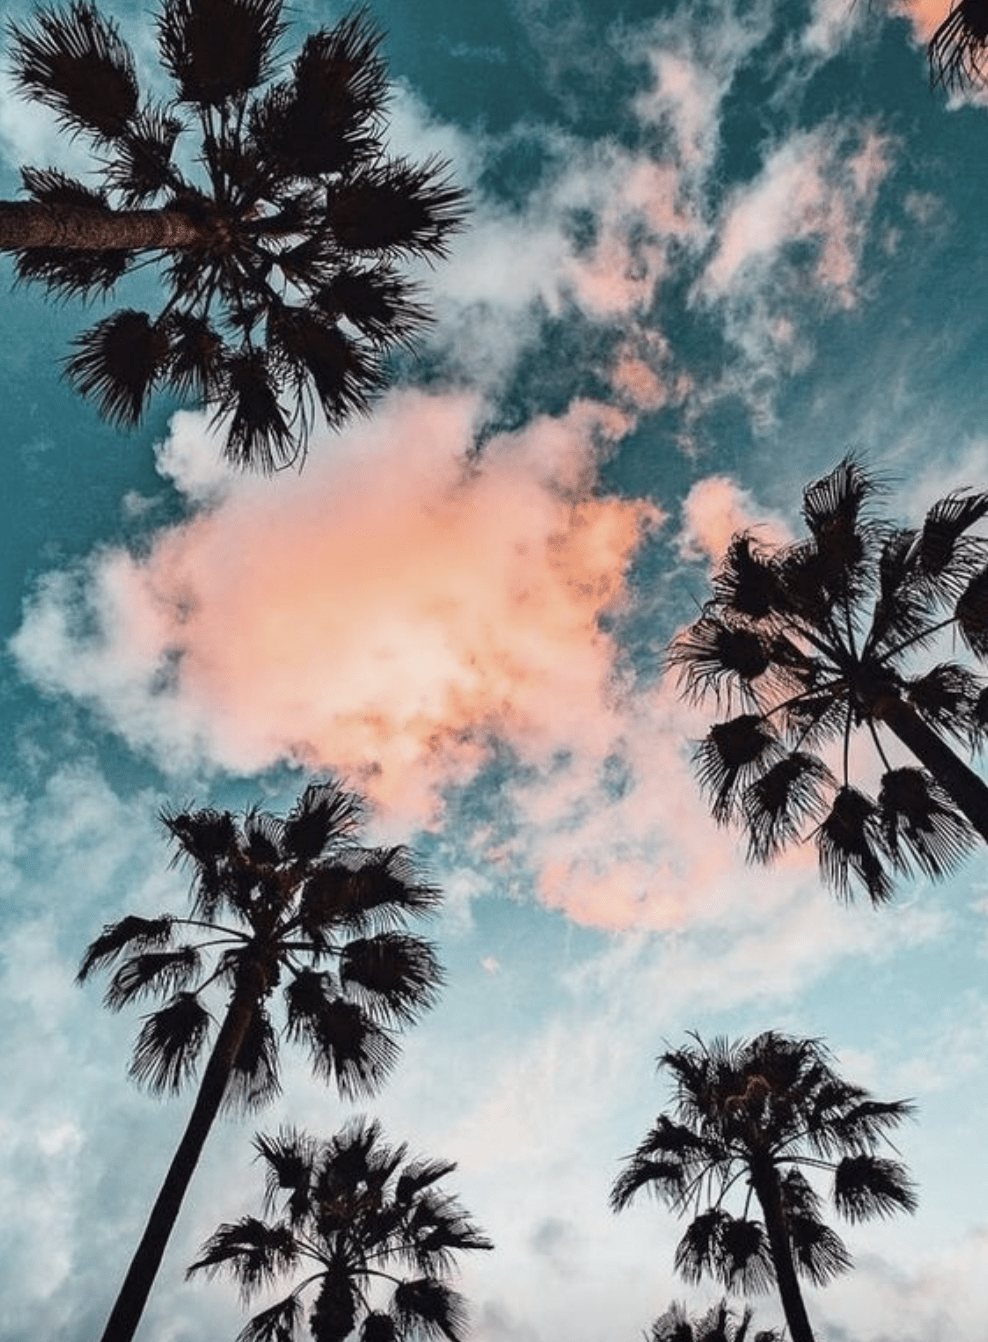 Palm trees and a blue sky with pink clouds - Palm tree